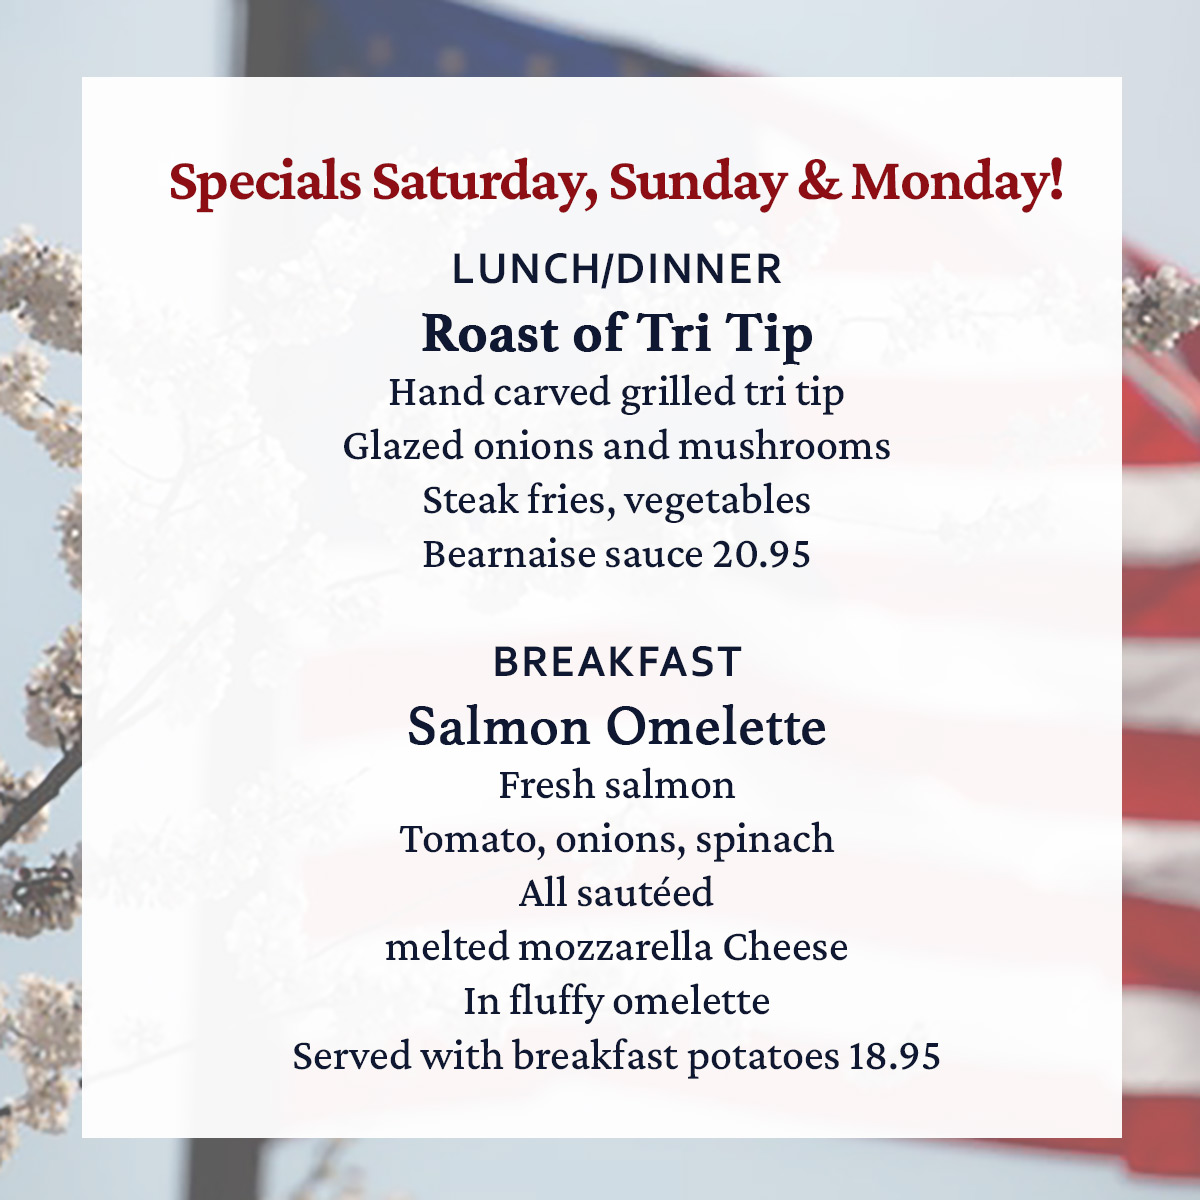 Memorial Day Lunch and Breakfast SPECIALS SATURDAY, SUNDAY & MONDAY!